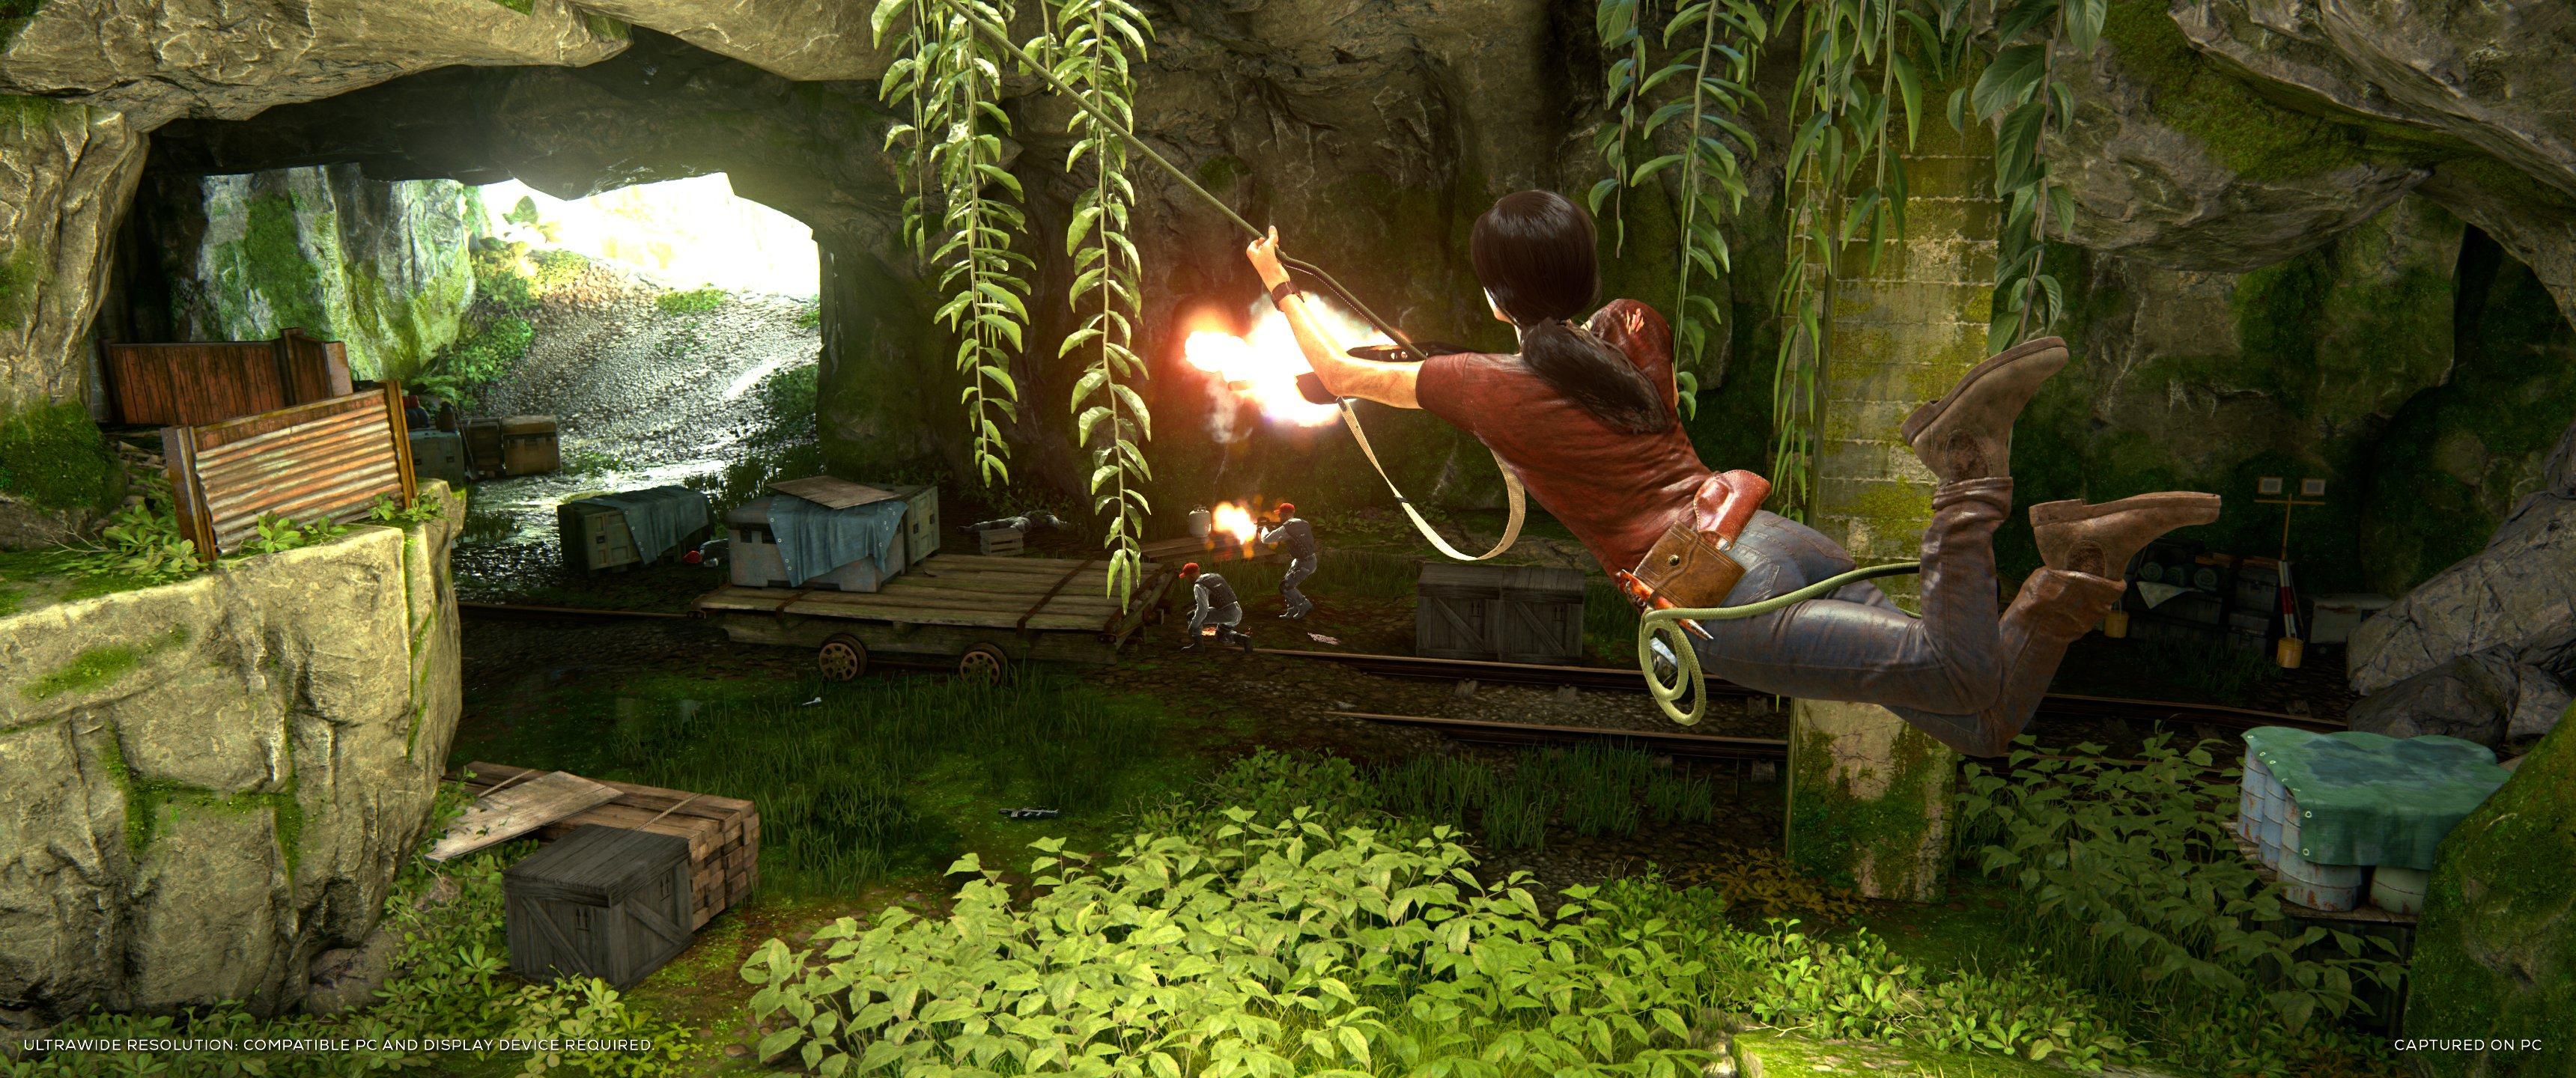 Game review: Uncharted: Legacy of Thieves Collection (PC)